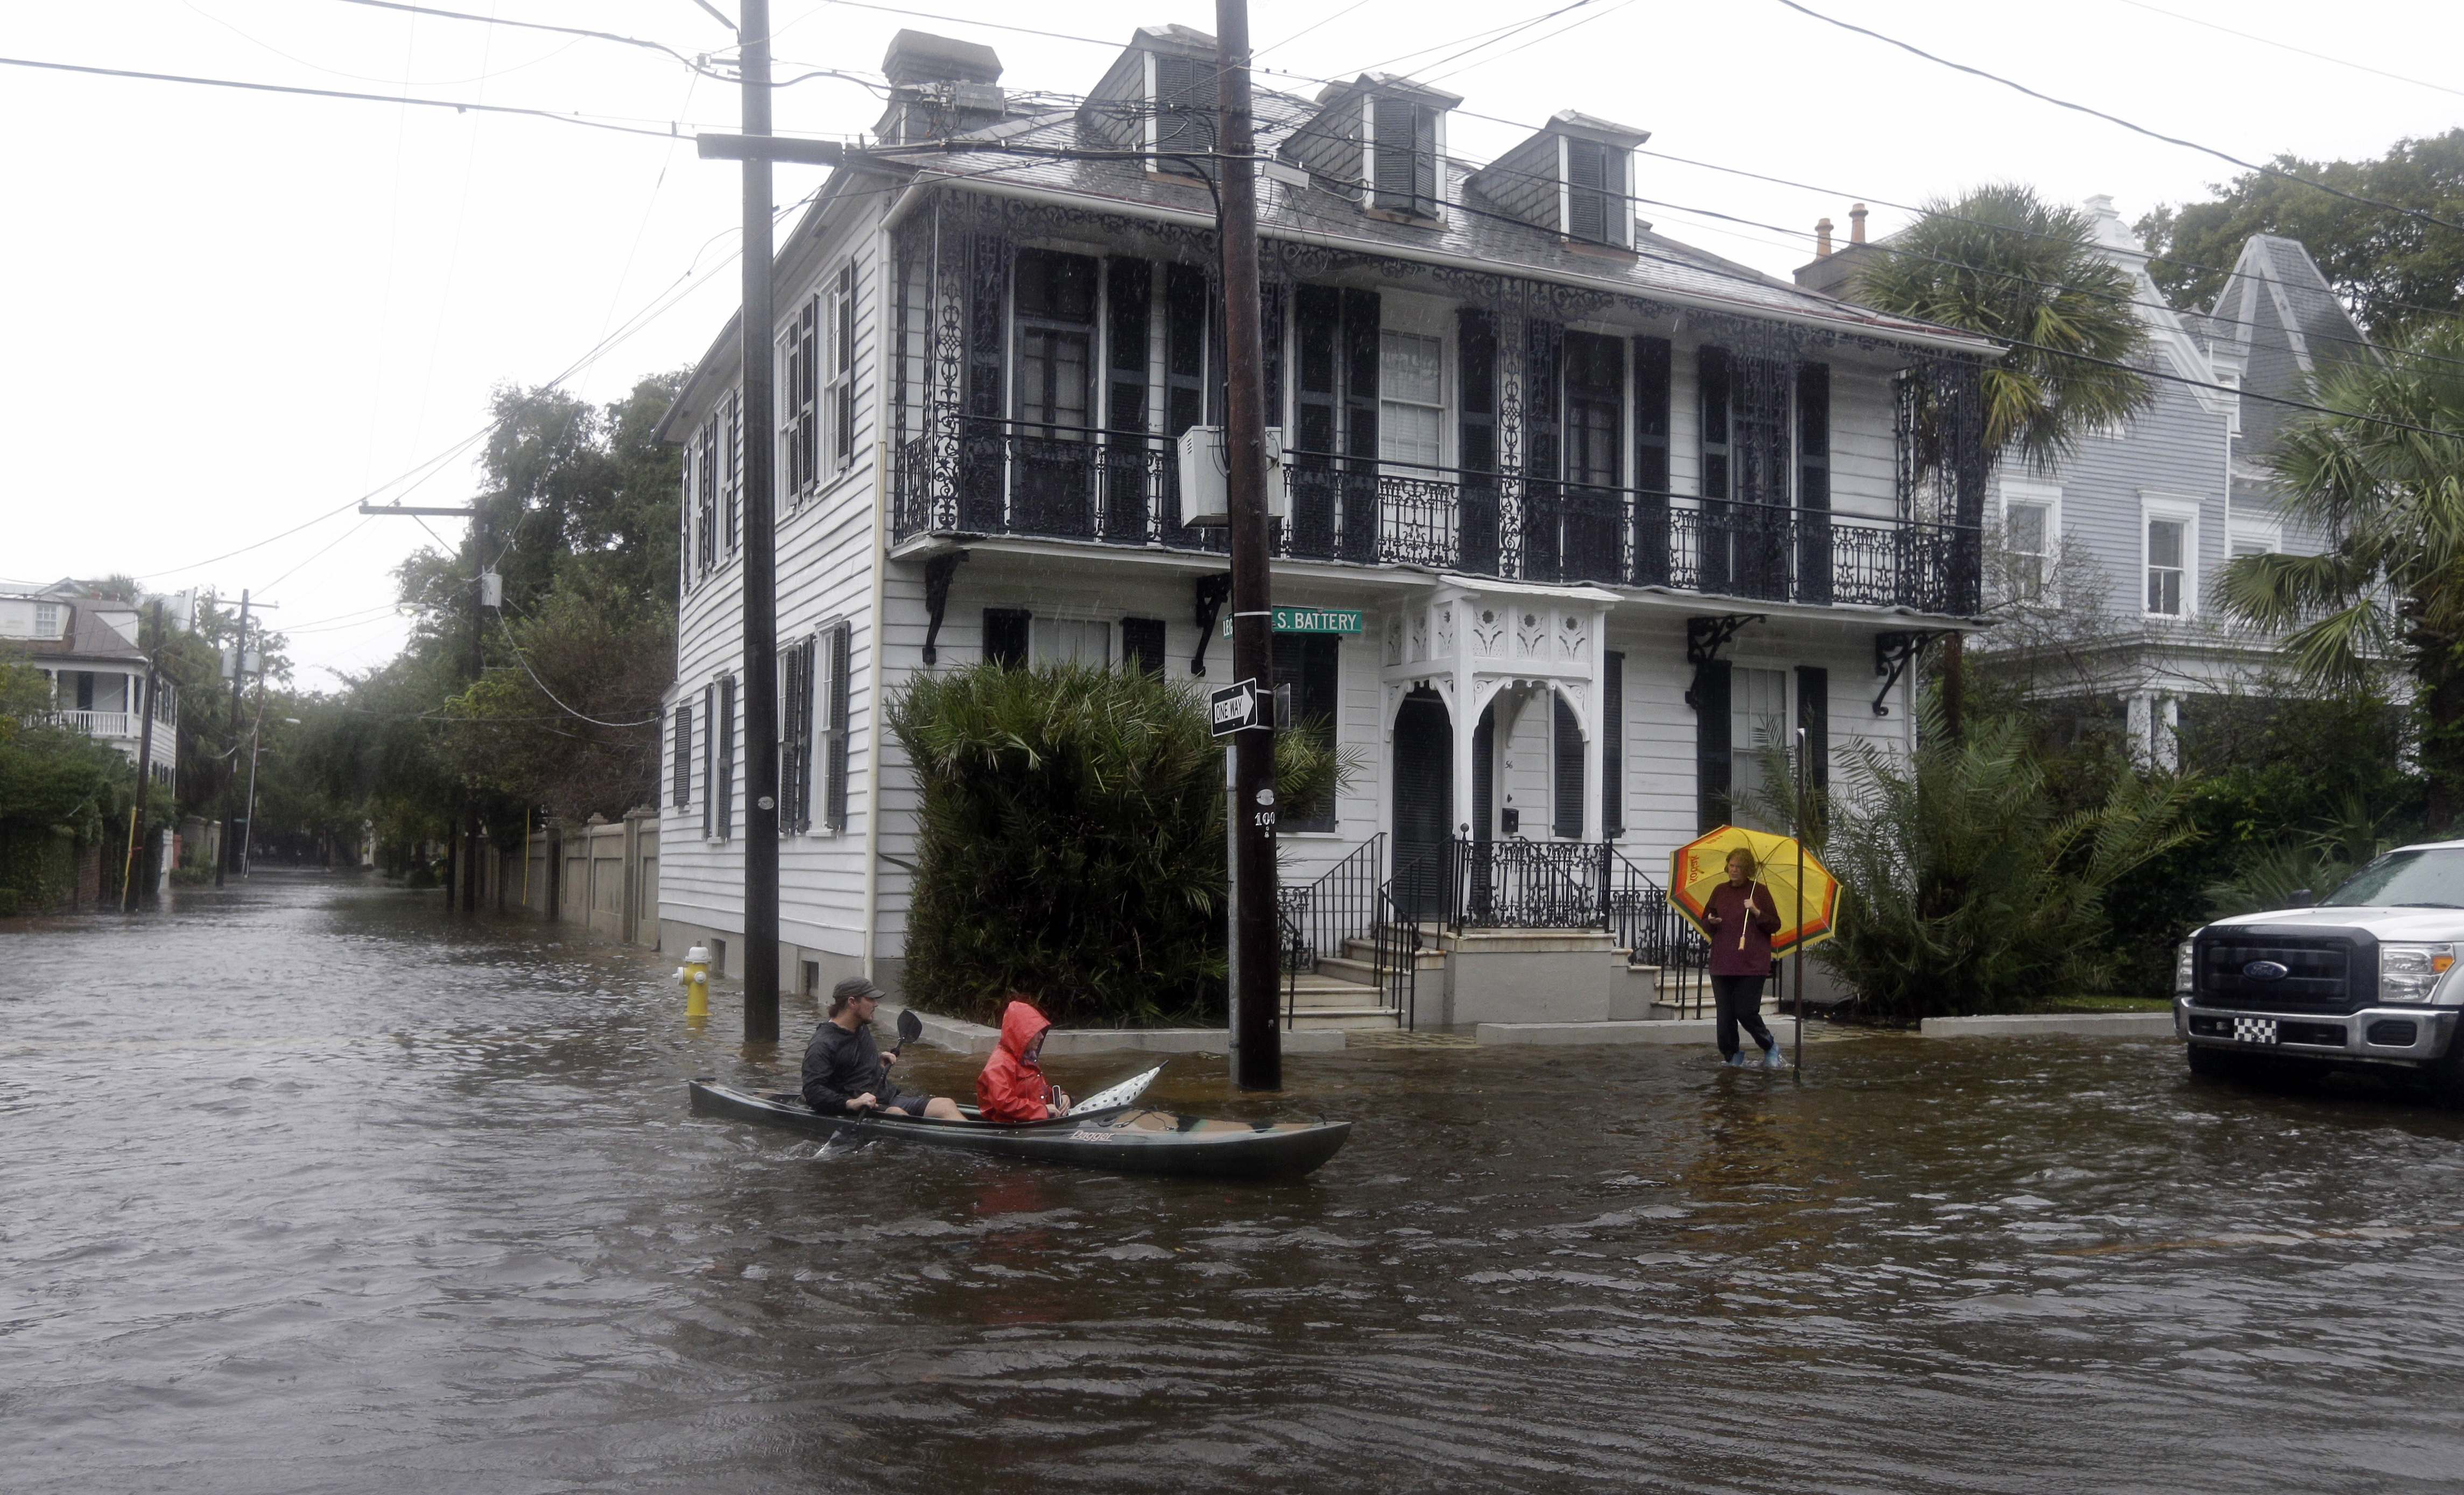 Paul Banker, left, paddles a kayak and his wife Wink Banker, as they takes photos on a flooded street in Charleston, S.C., Saturday, Oct. 3, 2015